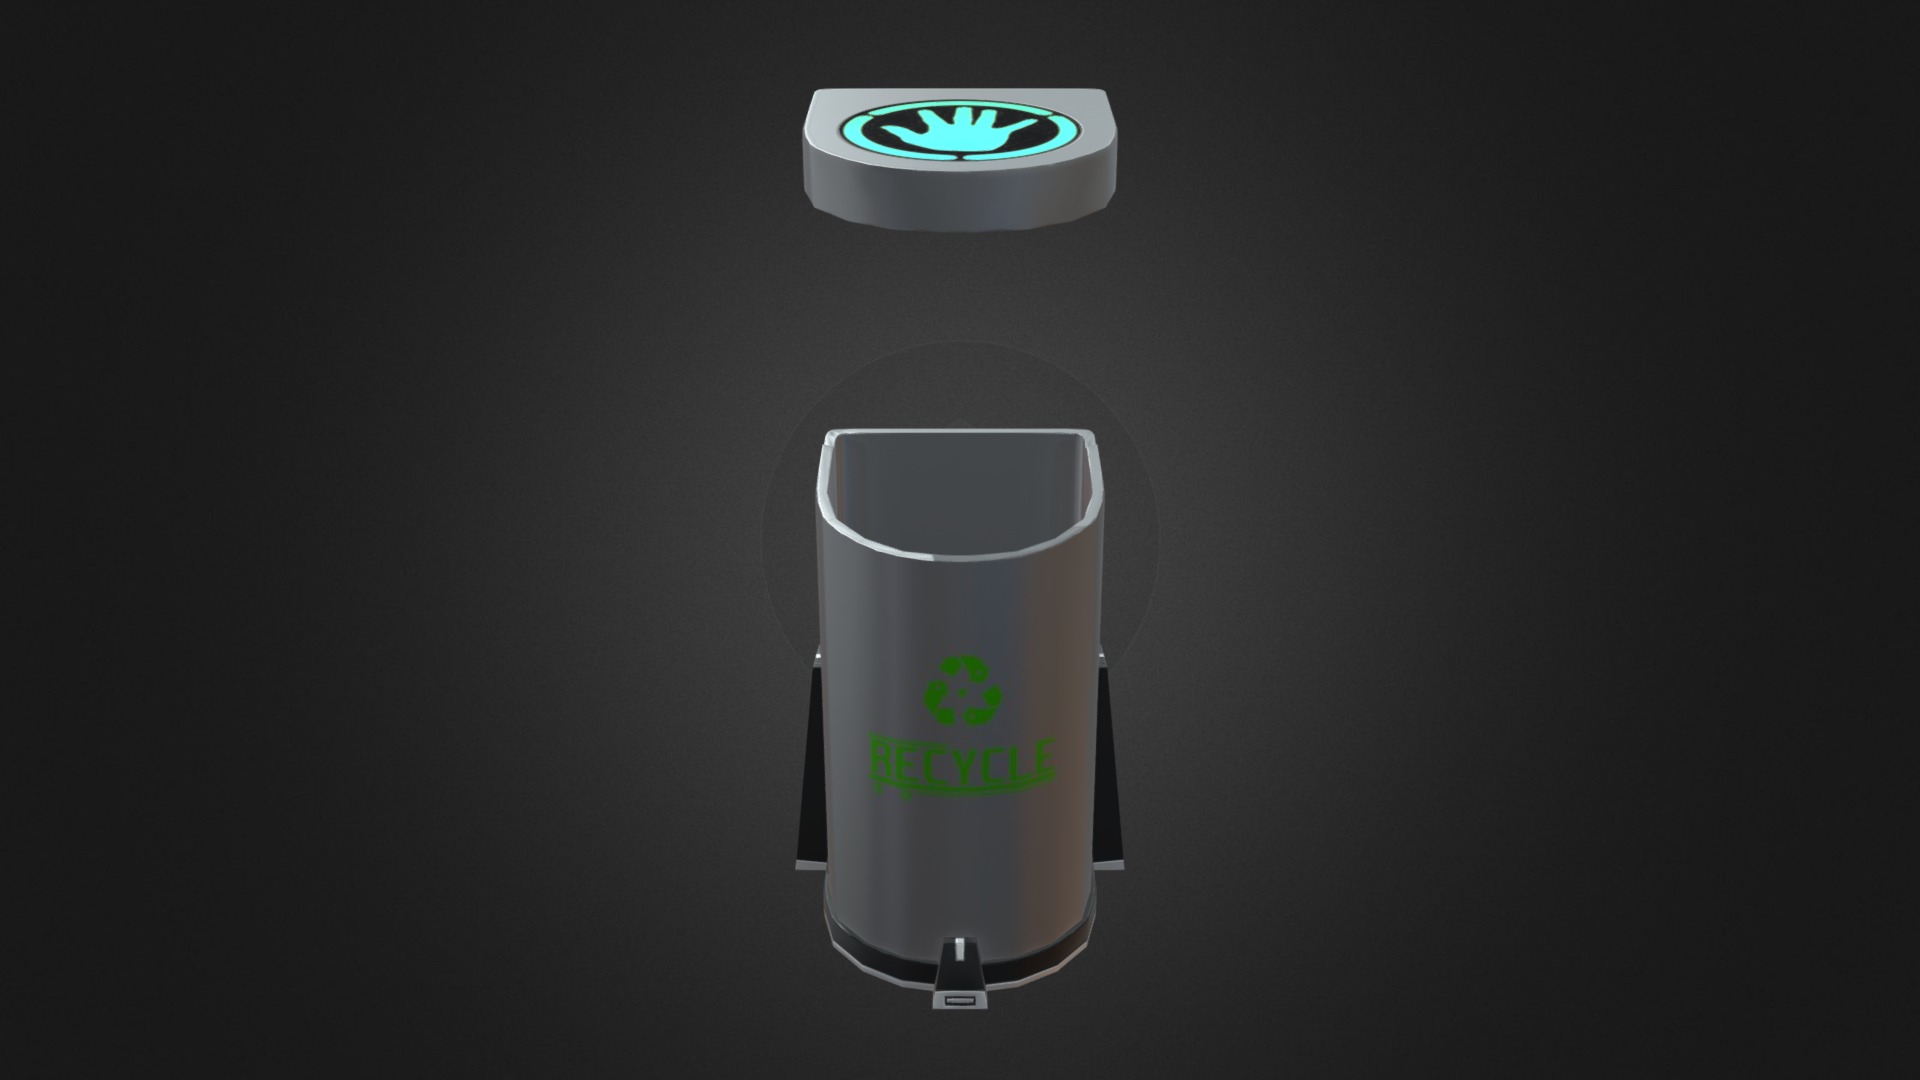 3D model Futuristic Trash Can - This is a 3D model of the Futuristic Trash Can. The 3D model is about a white and green computer mouse.